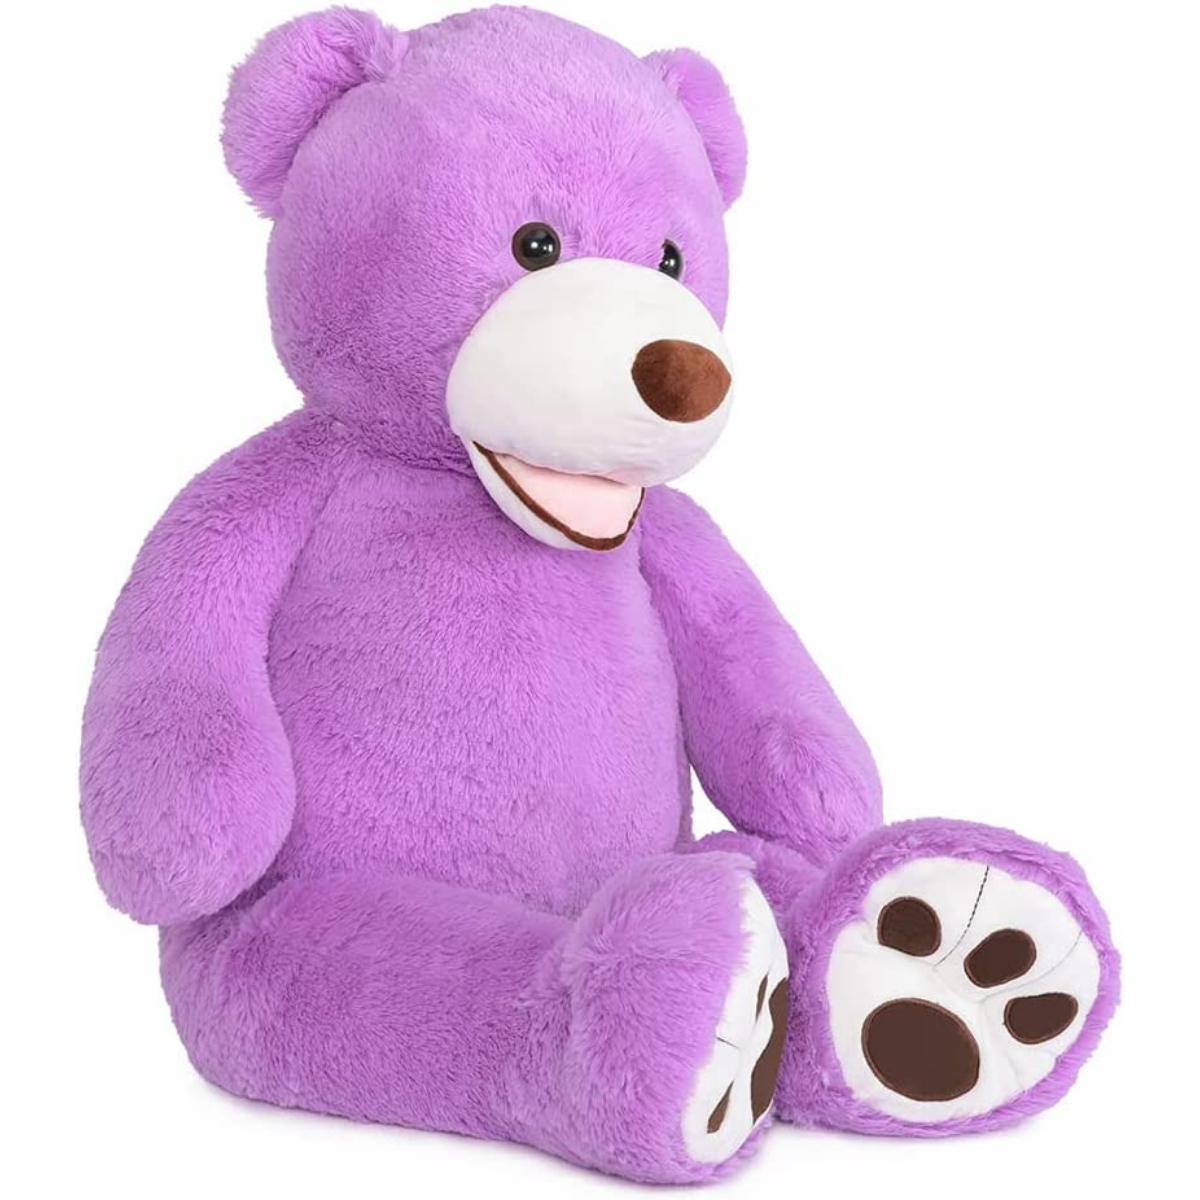 Smile Teddy Bear Plush Toy, Multicolor, 39/51/59/71 Inches